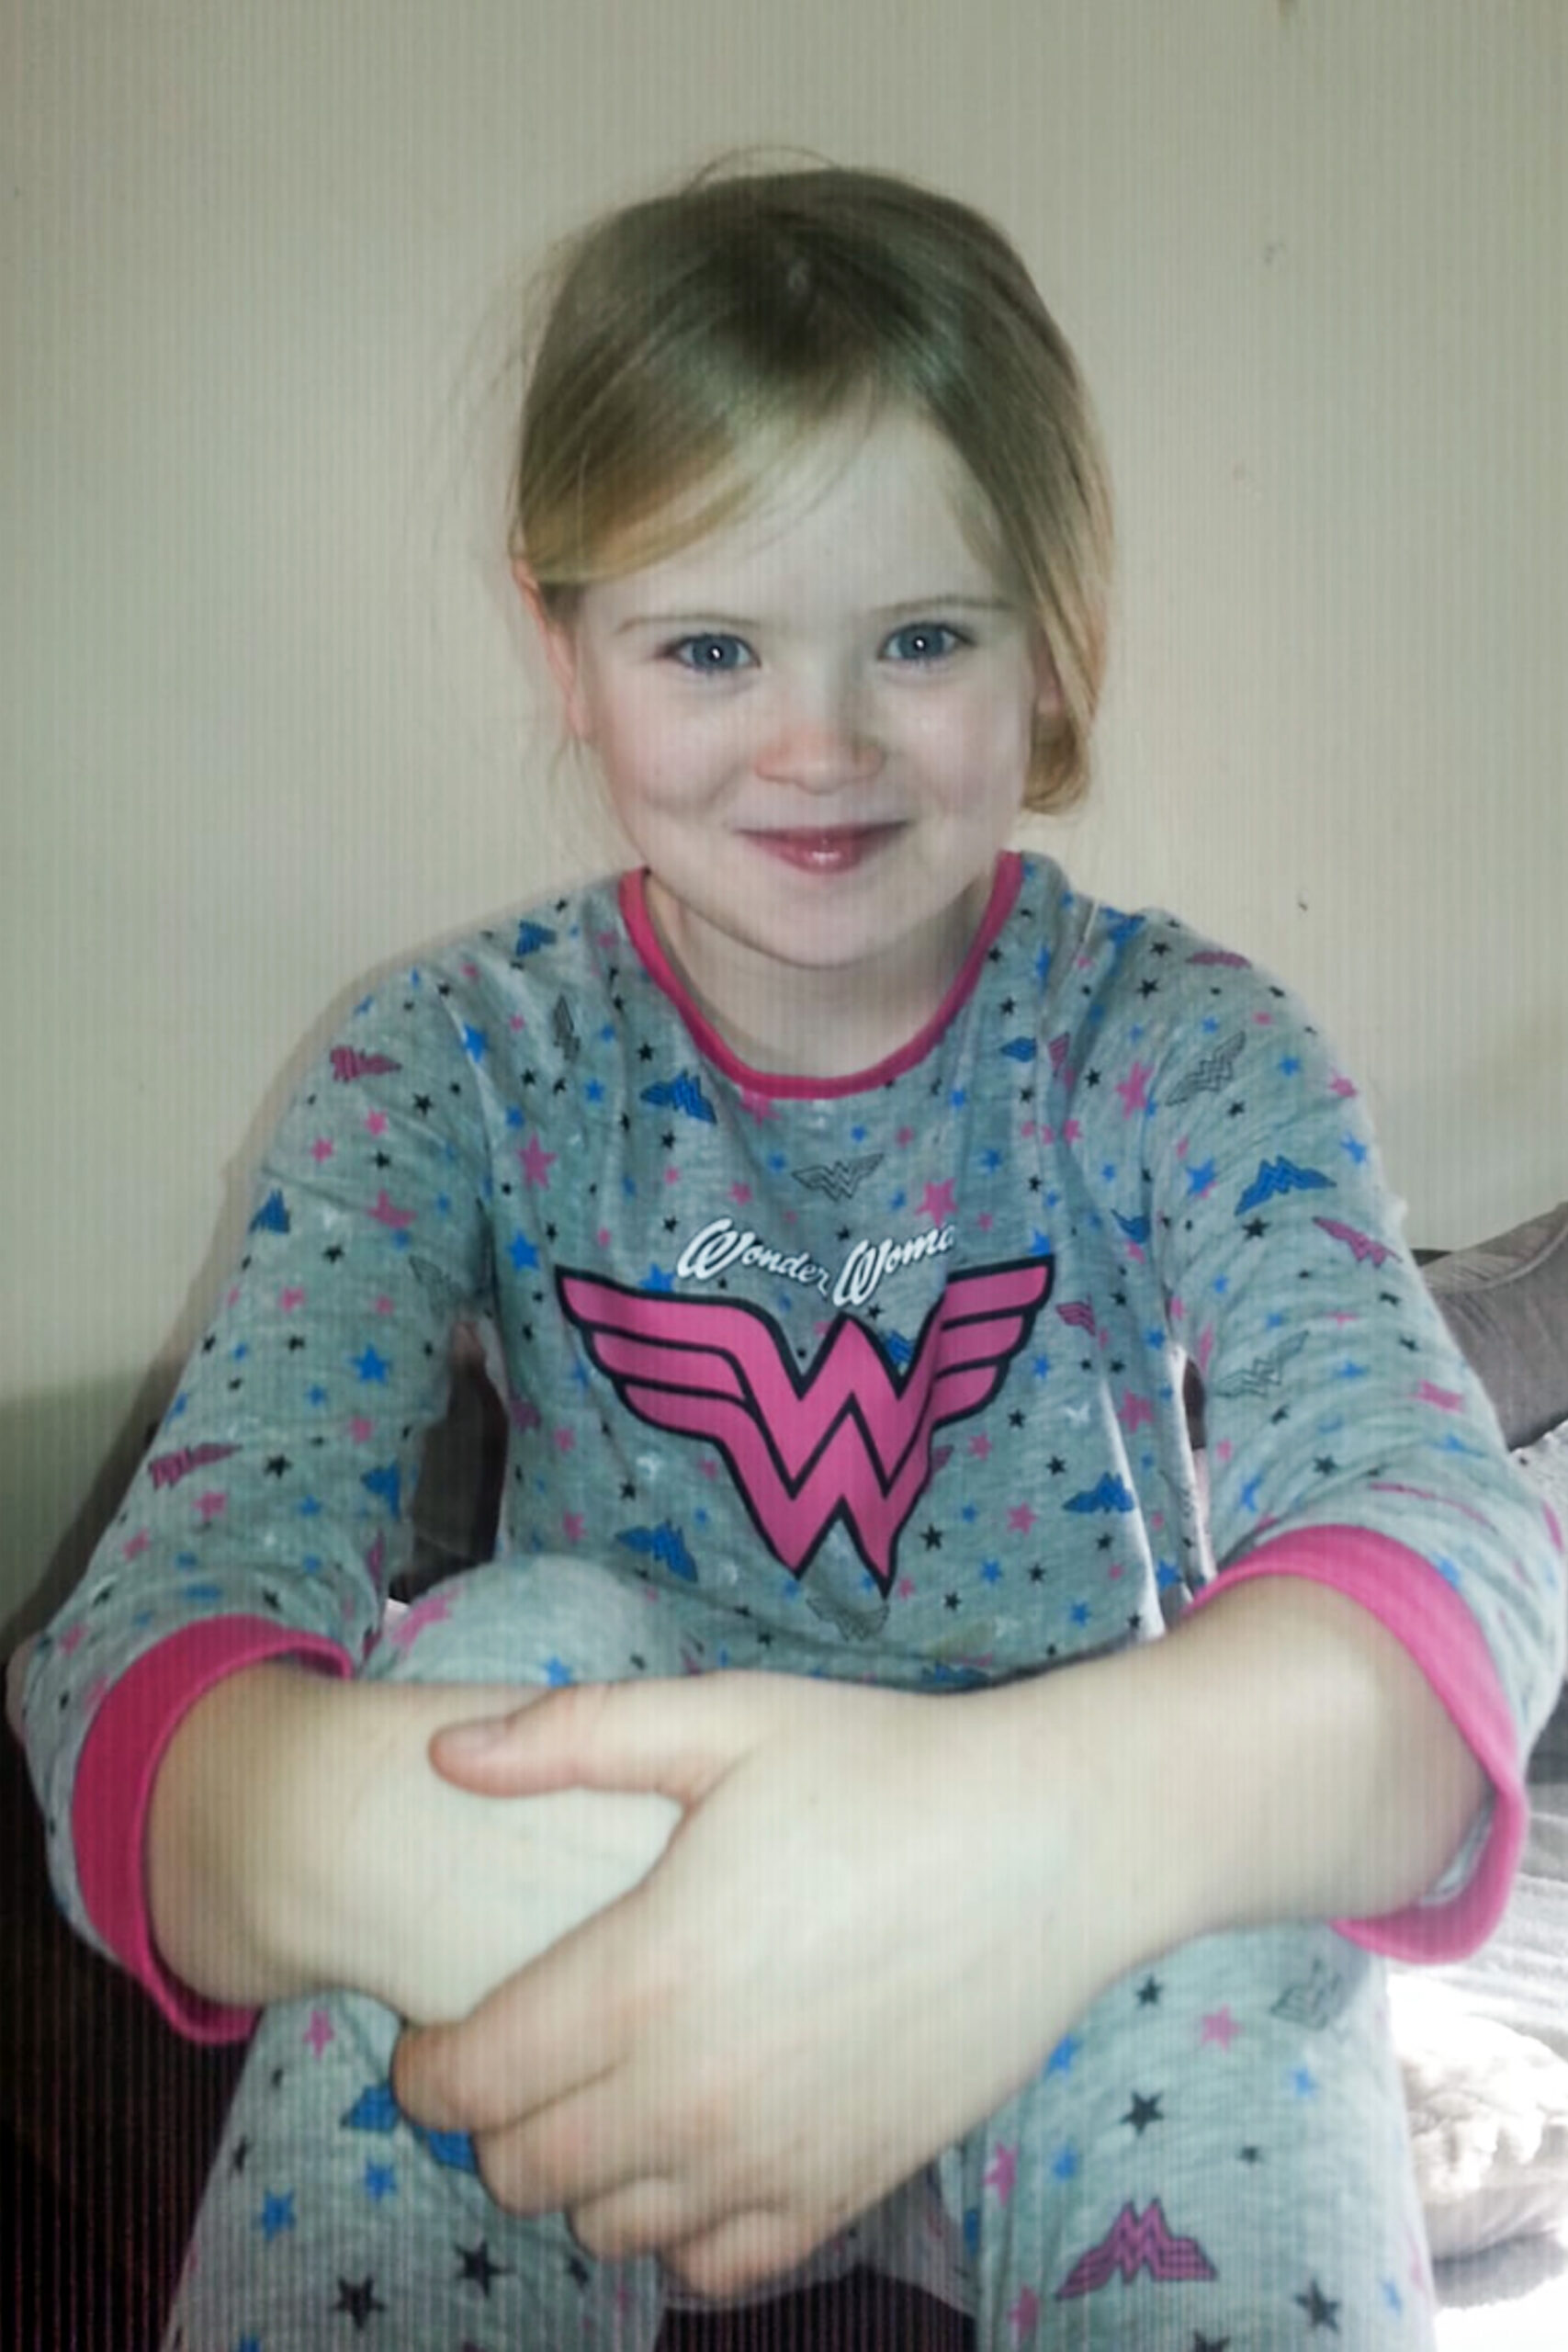 Eight-year-old Mylee Billingham was found with stab wounds on Saturday night.